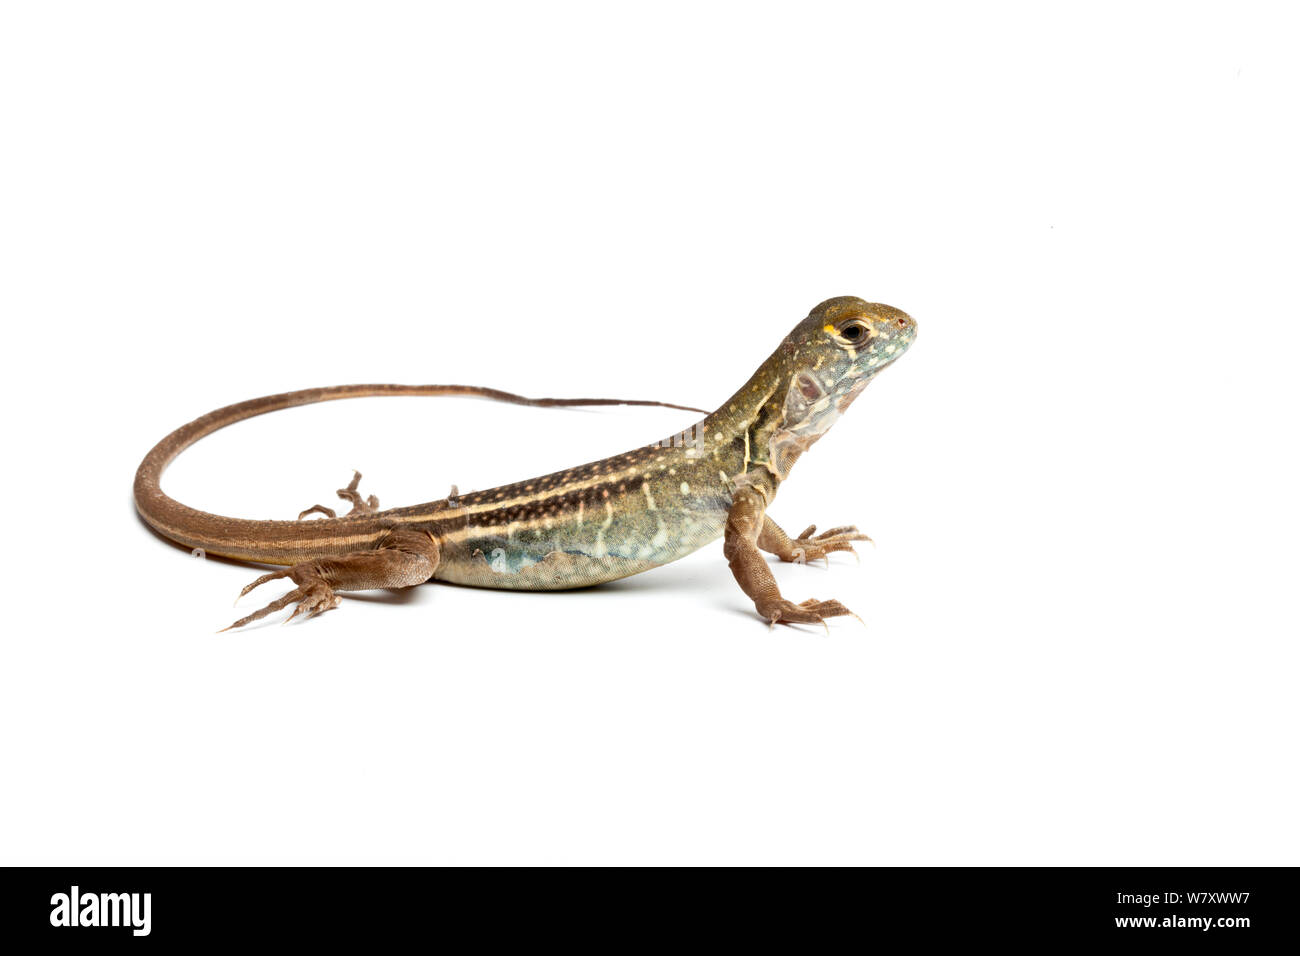 Chinese butterfly lizard (Leiolepis reevesii) on white background, captive from South East Asia. Stock Photo